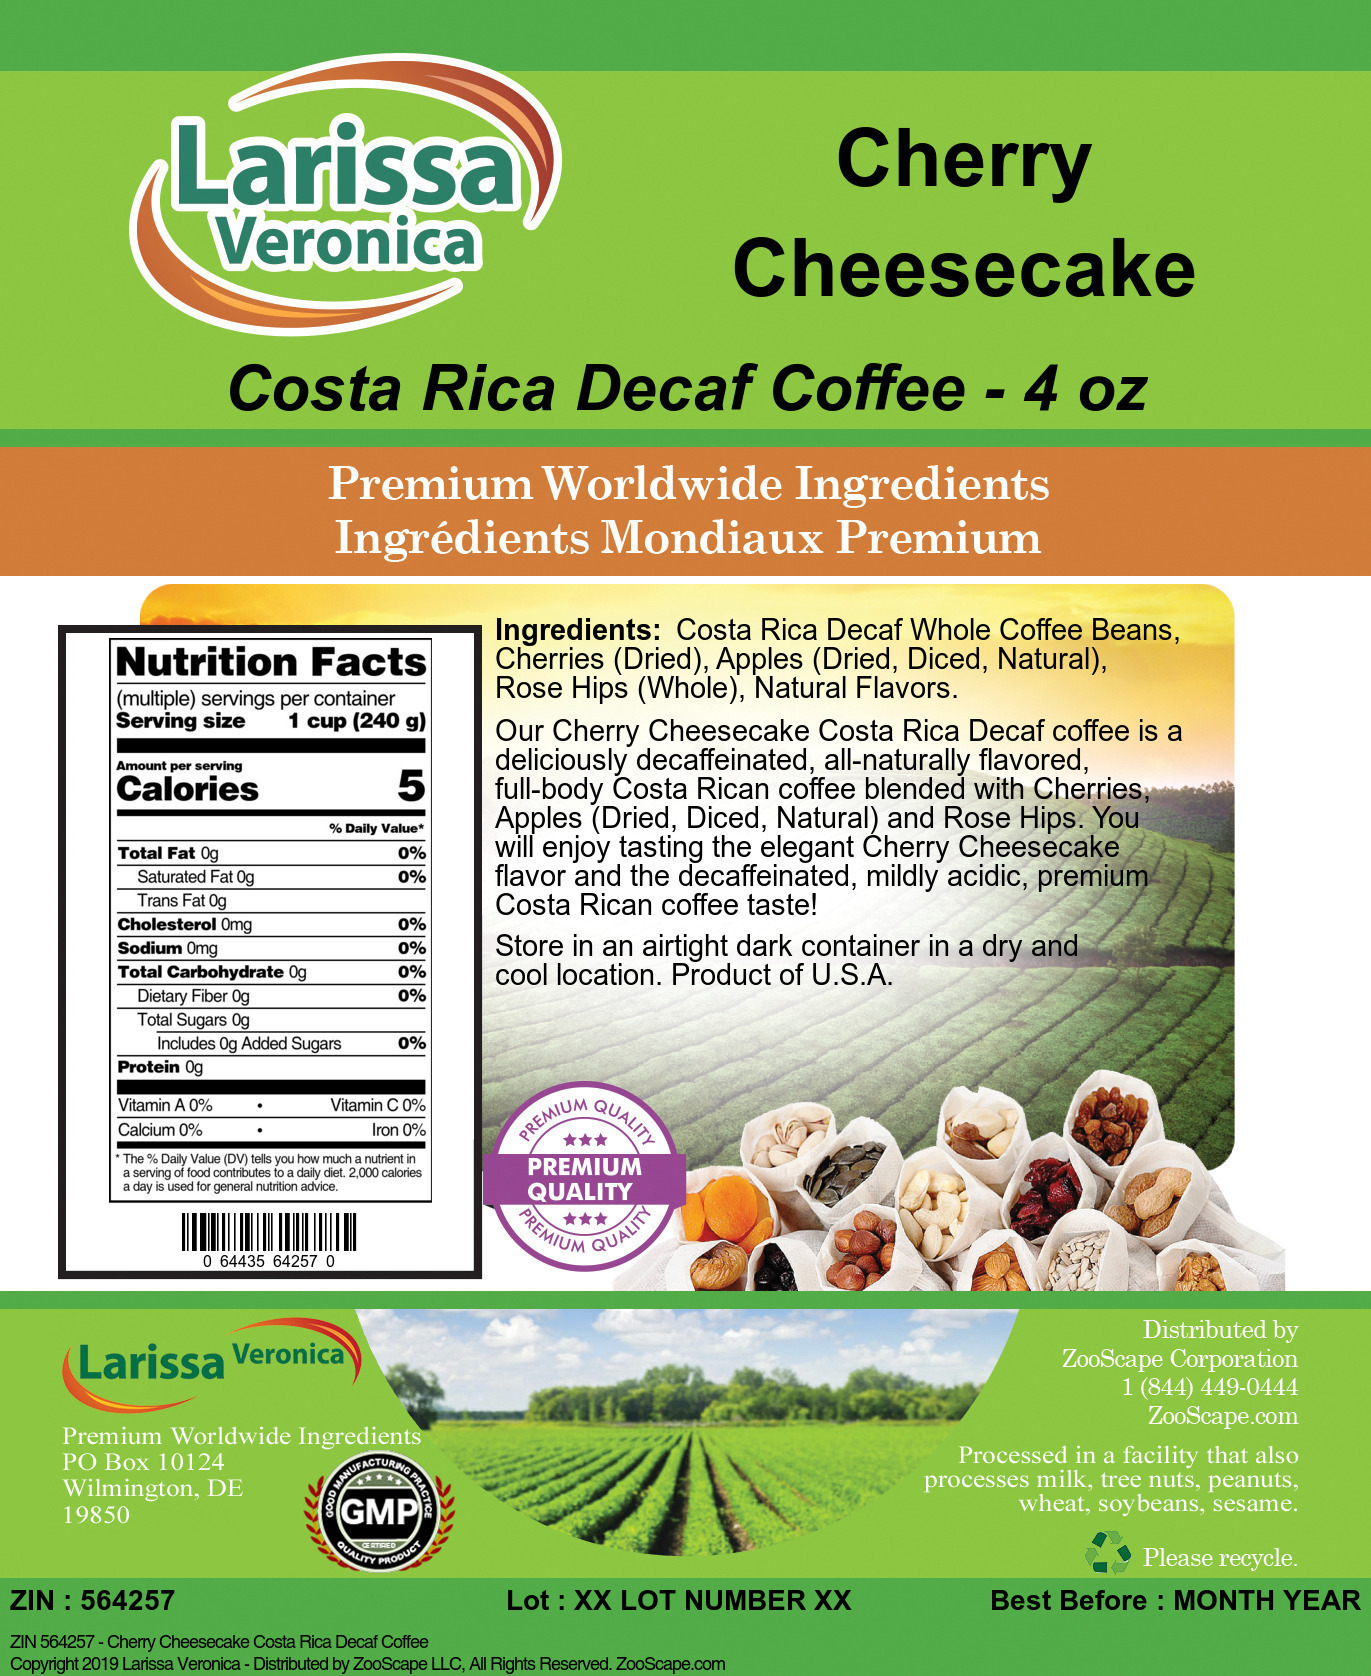 Cherry Cheesecake Costa Rica Decaf Coffee - Label